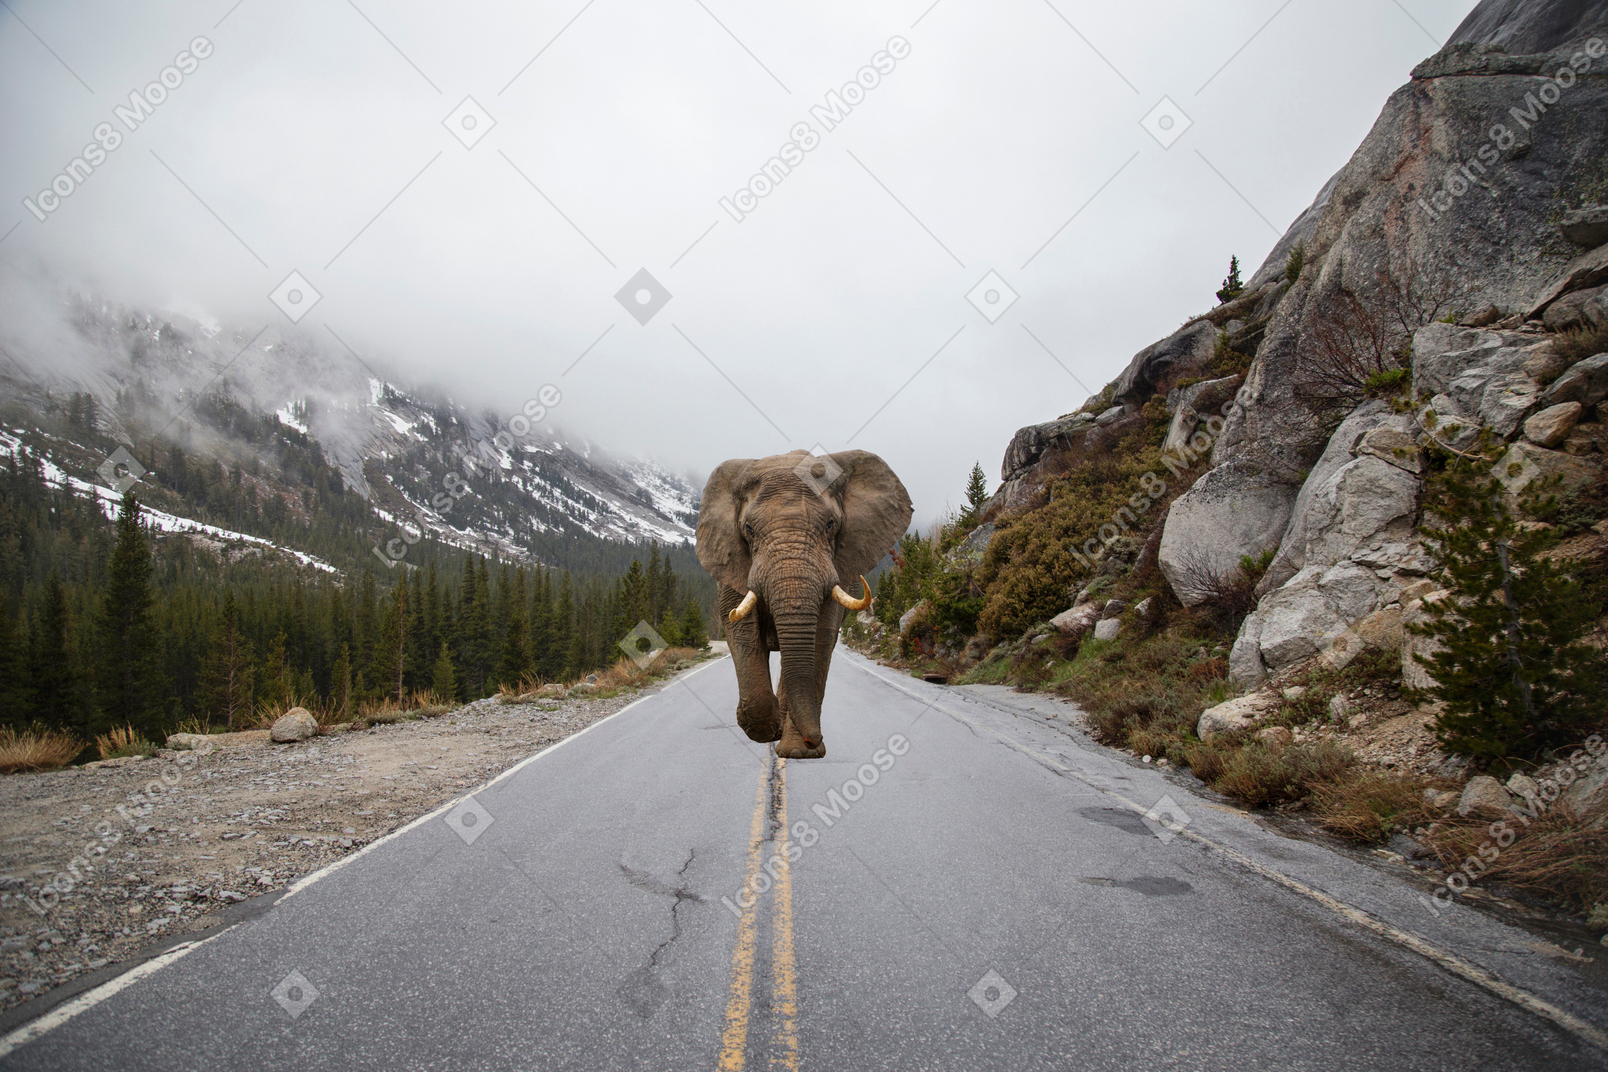 Elephant on the road in mountains